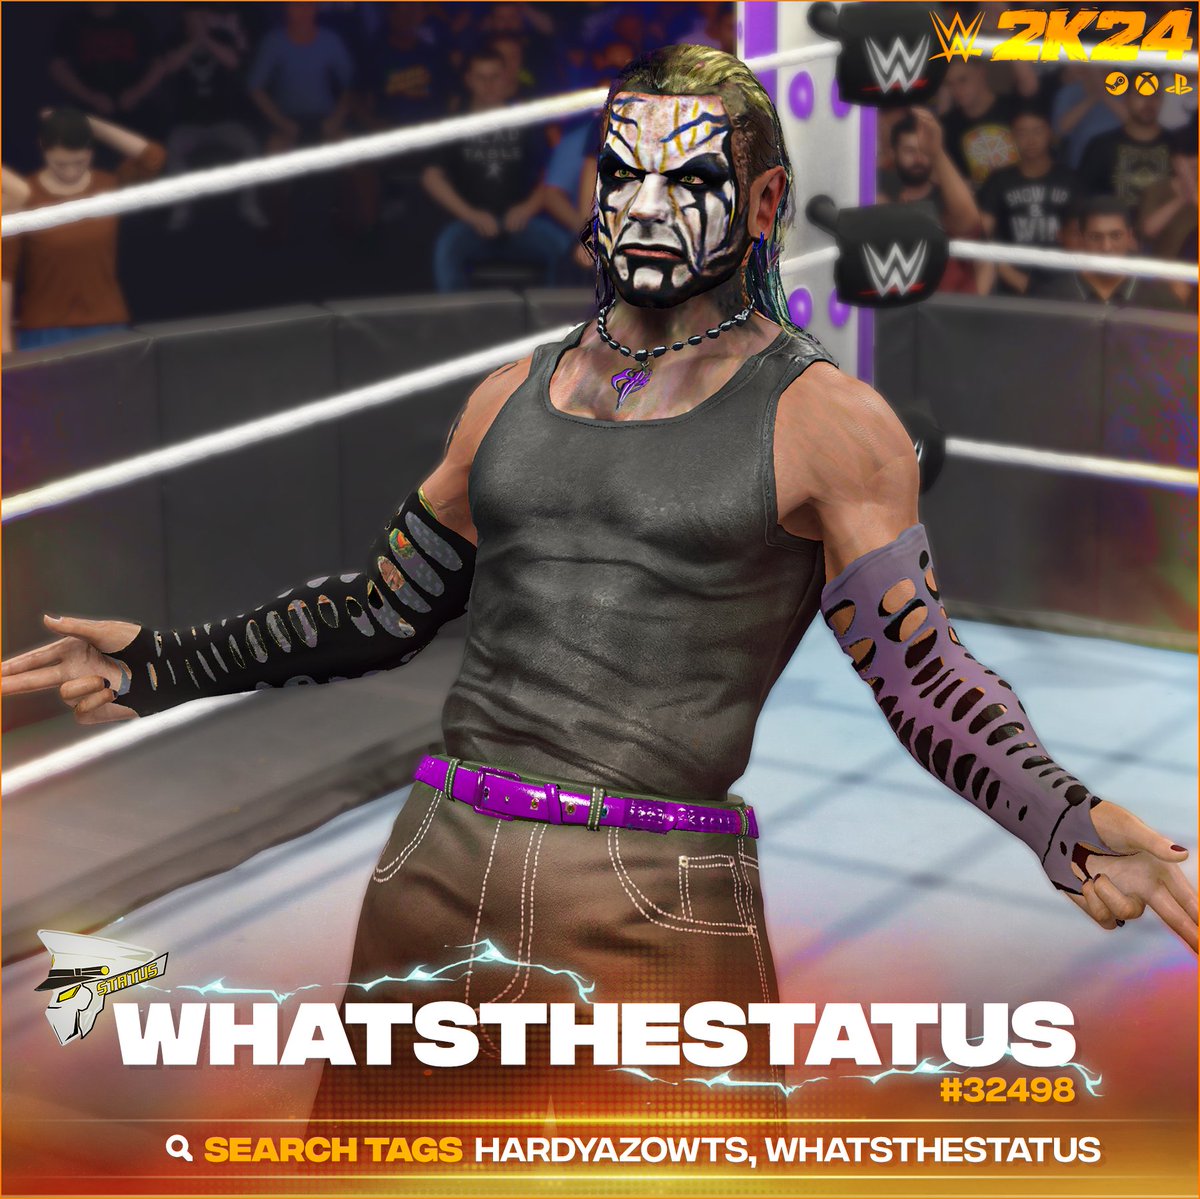 NEW! #WWE2K24 Upload To Community Creations! ★ Jeff Hardy '08 ★ Search Tag → HARDYAZOWTS or WhatsTheStatus ★ Collaboration with @Azorthious ★ Support Me → linktr.ee/WhatsTheStatus ★ INCLUDES ● Custom Portrait ● 2008 Attire ● Hidden Commentary (Jeff Hardy) Very…